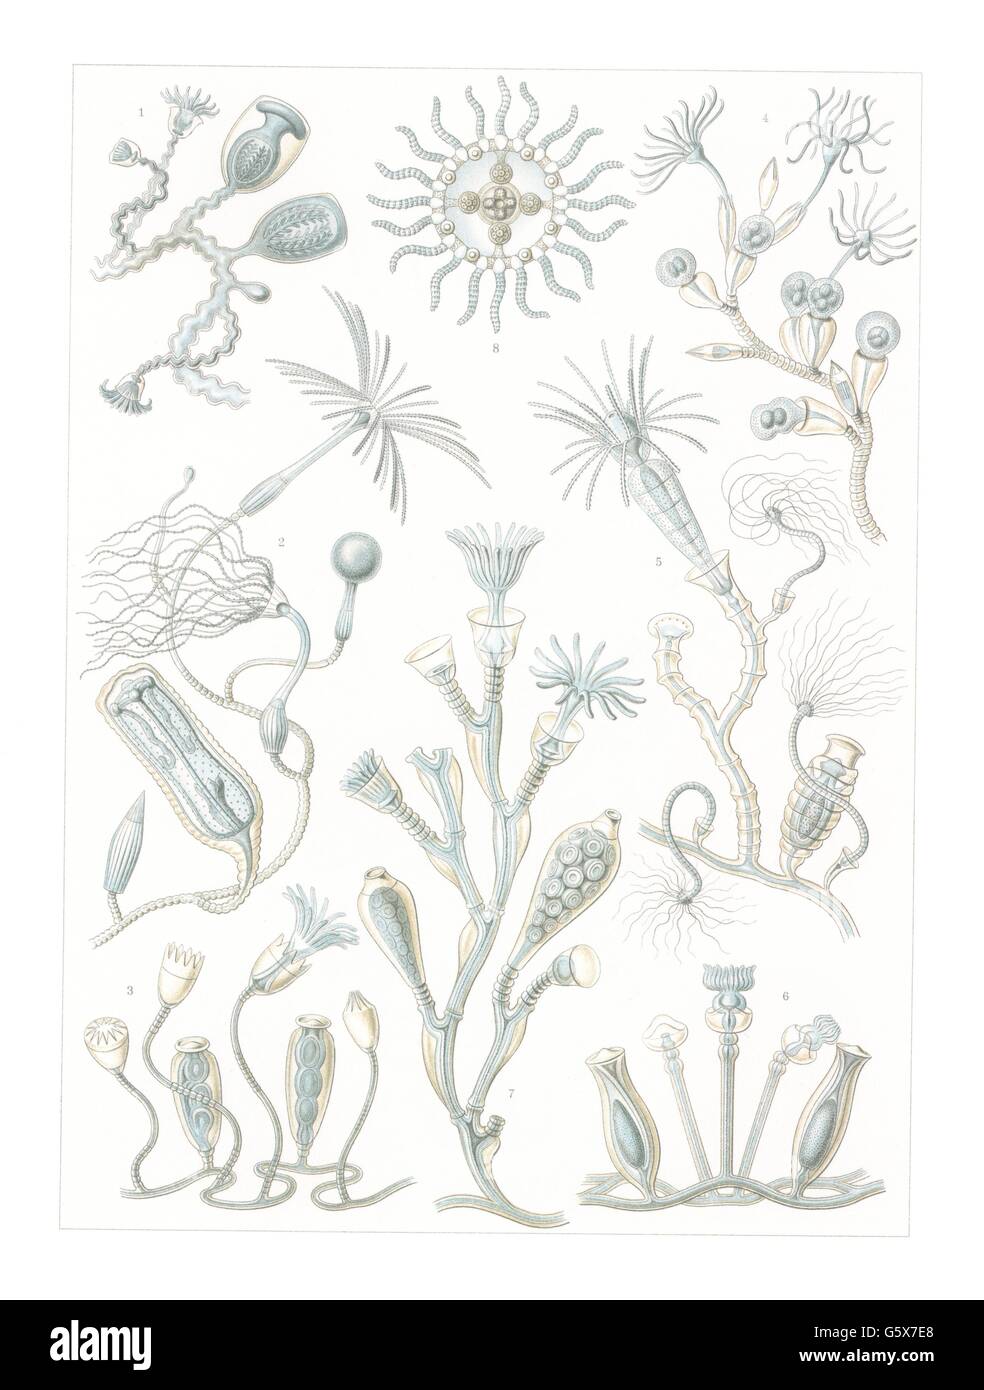 zoology / animals, cnidaria, campanularians  (Campanulariida), colour lithograph, out of: Ernst Haeckel, 'Kunstformen der Natur', Leipzig - Vienna, 1899 - 1904, Additional-Rights-Clearences-Not Available Stock Photo